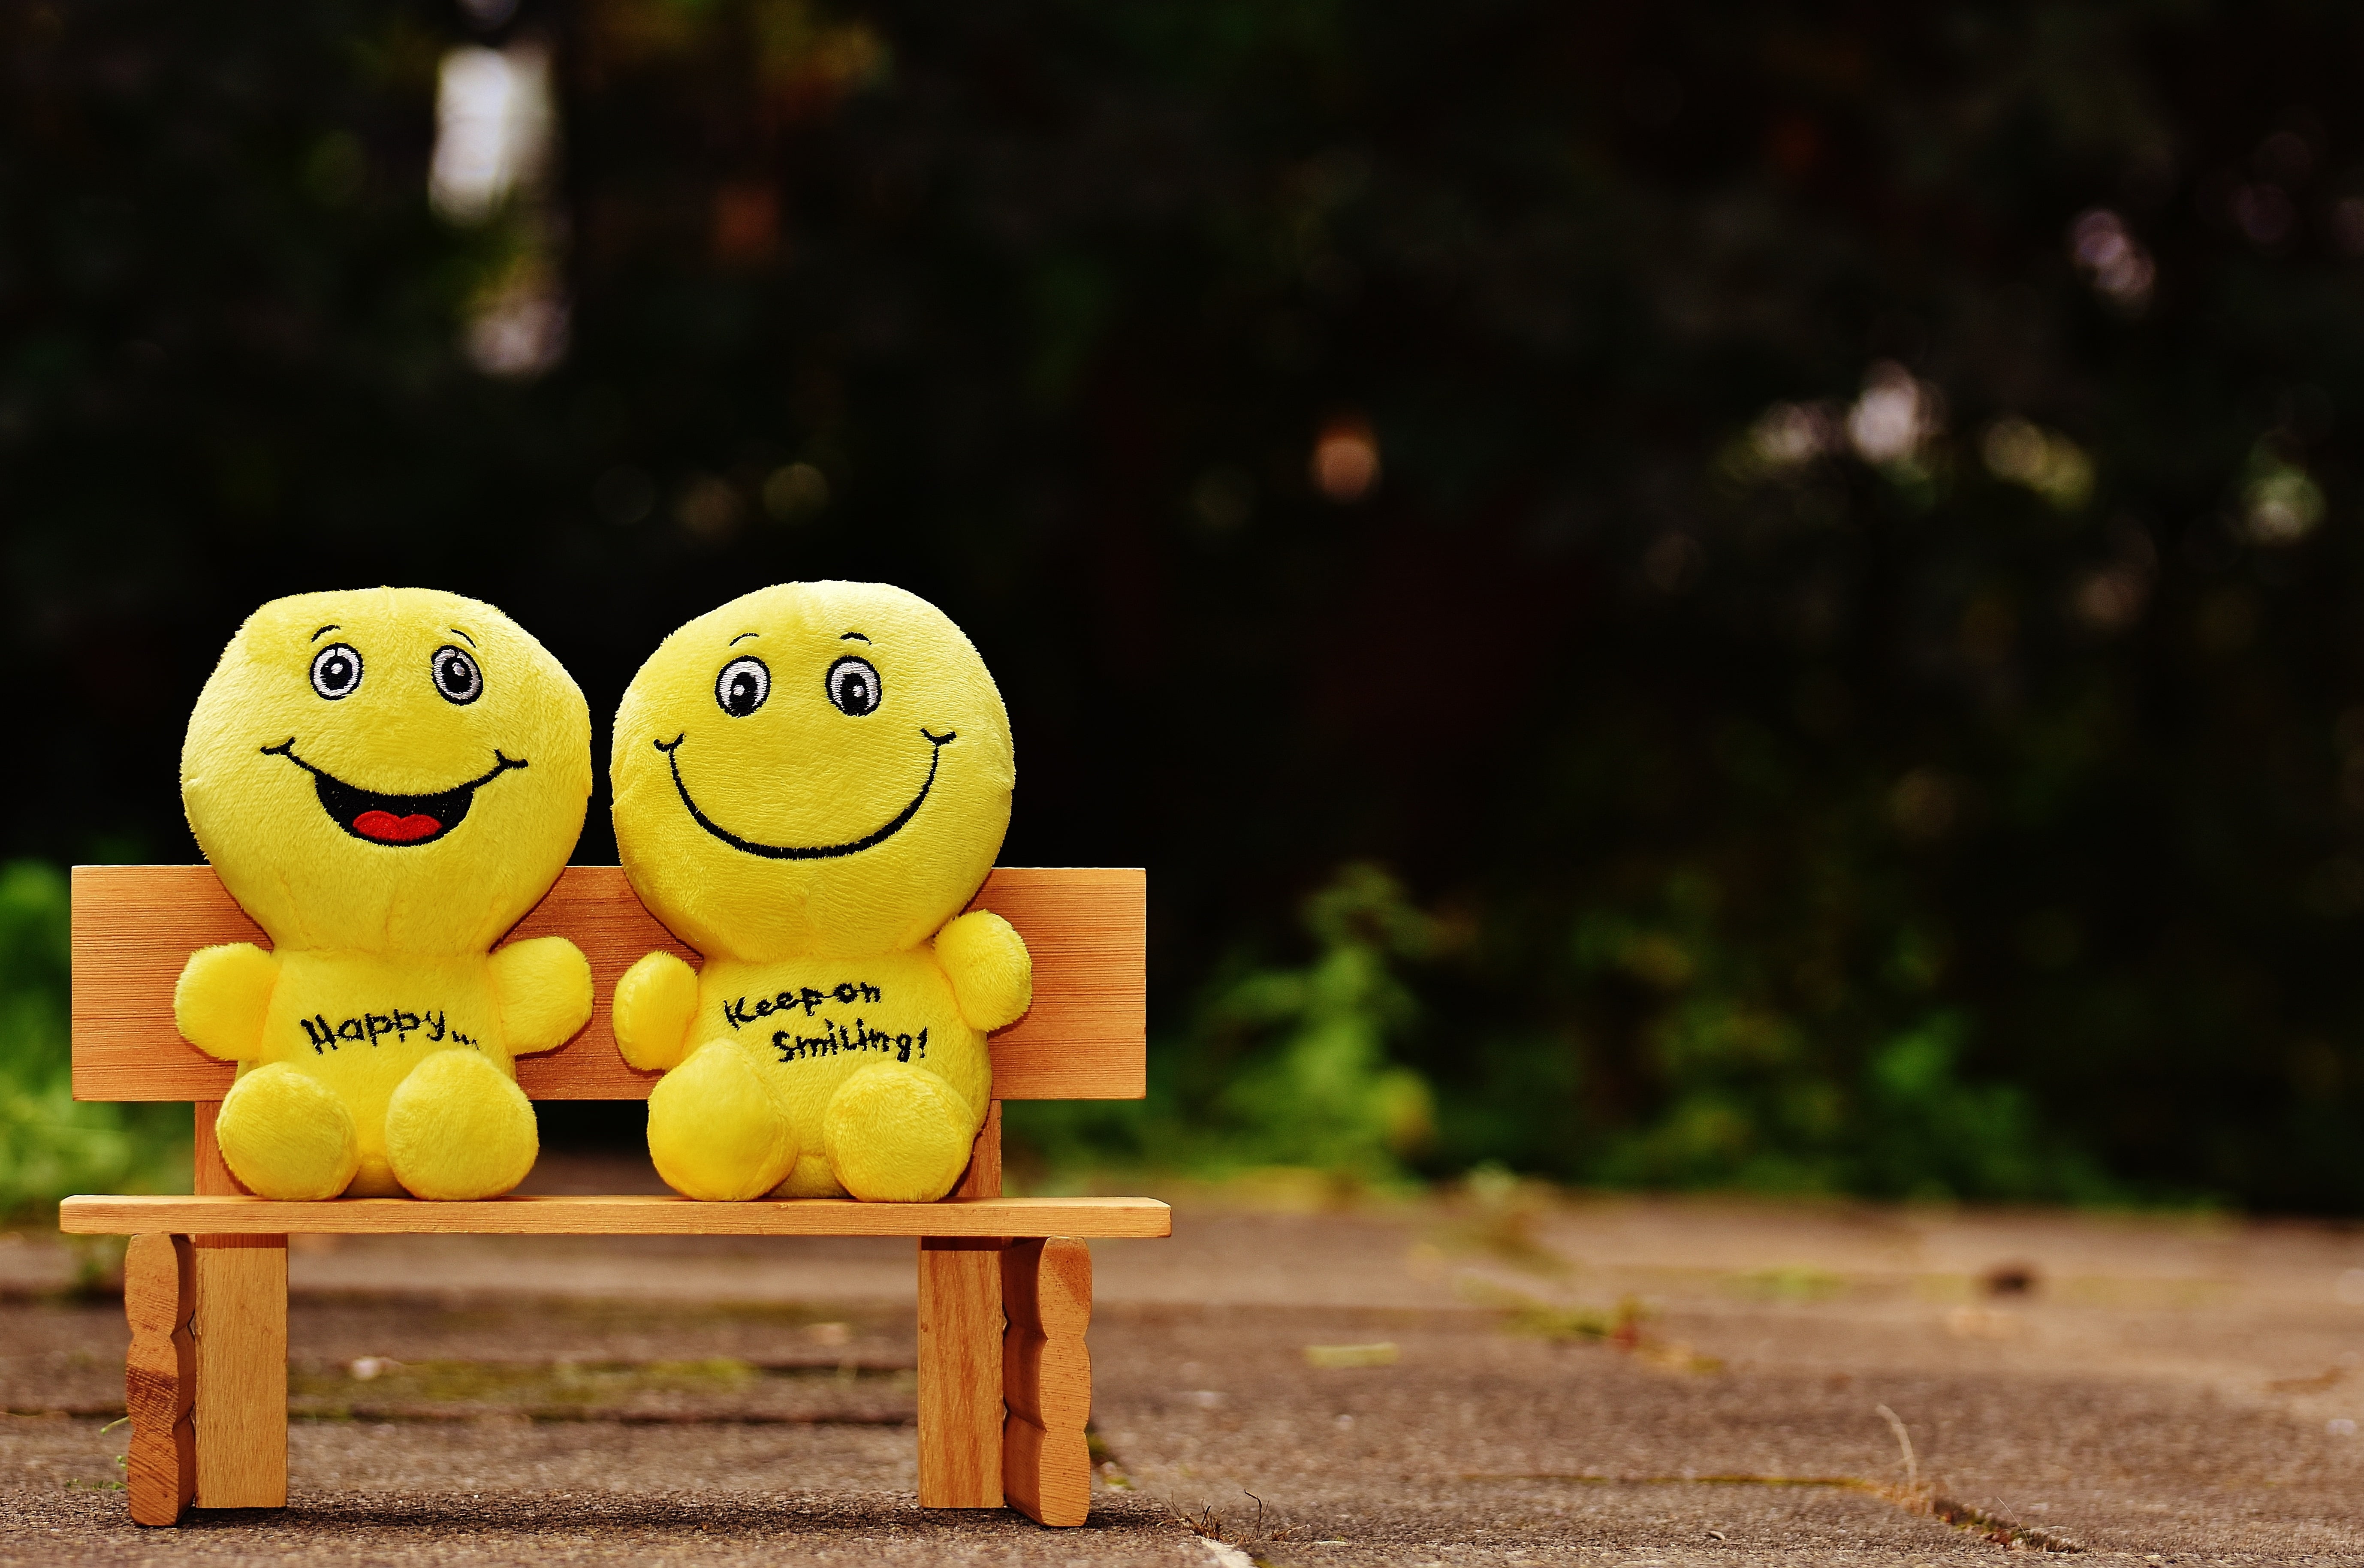 two happy emoji plush toys, smiles, cheerful, bench, cute, wood - Material